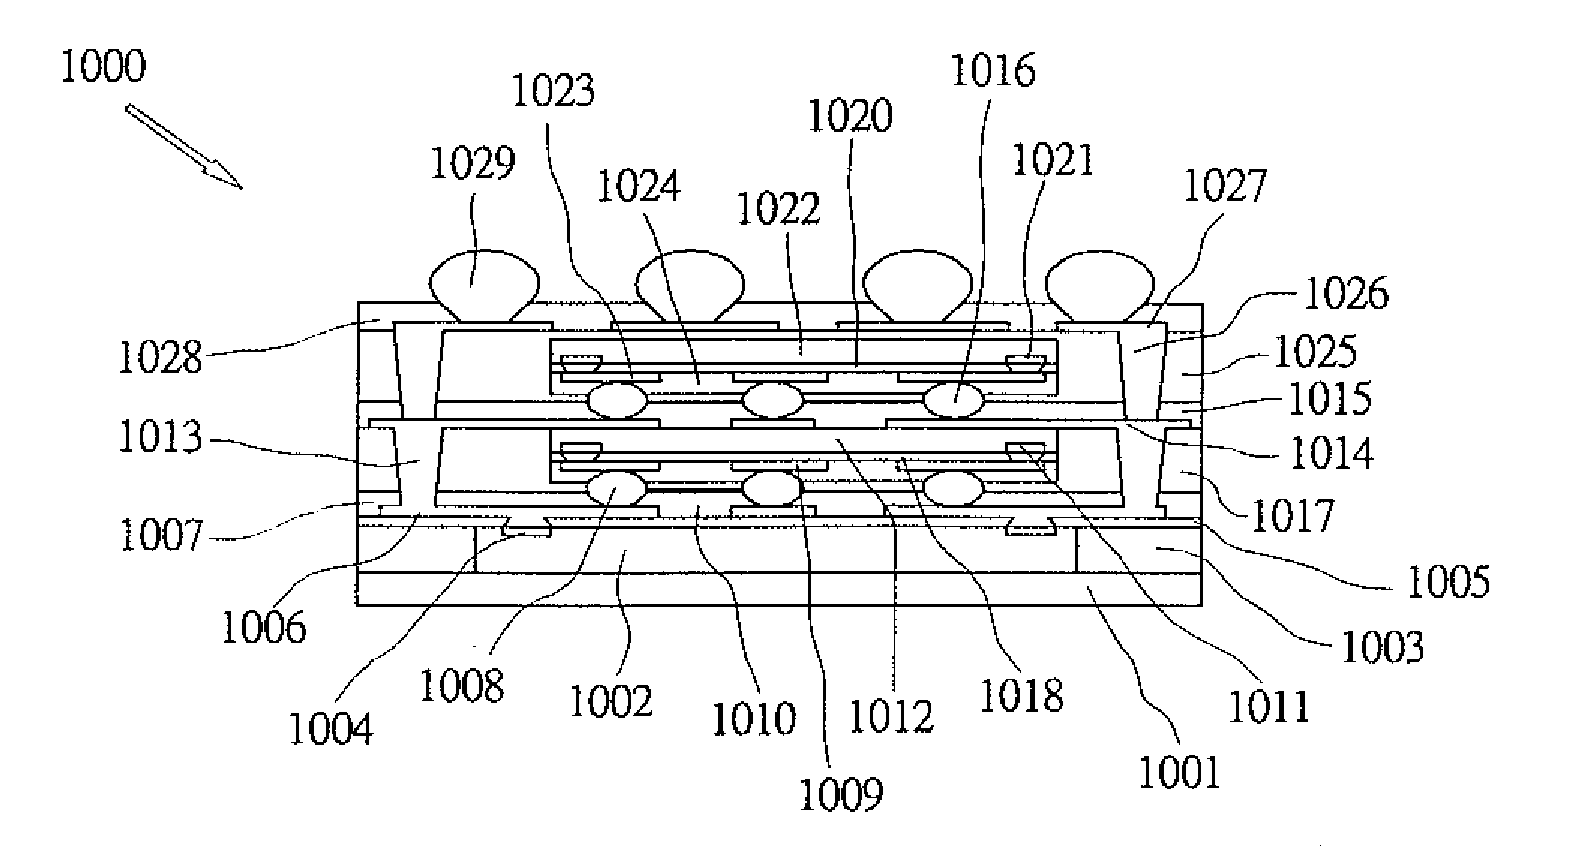 Multi-chip package structure and method of forming the same